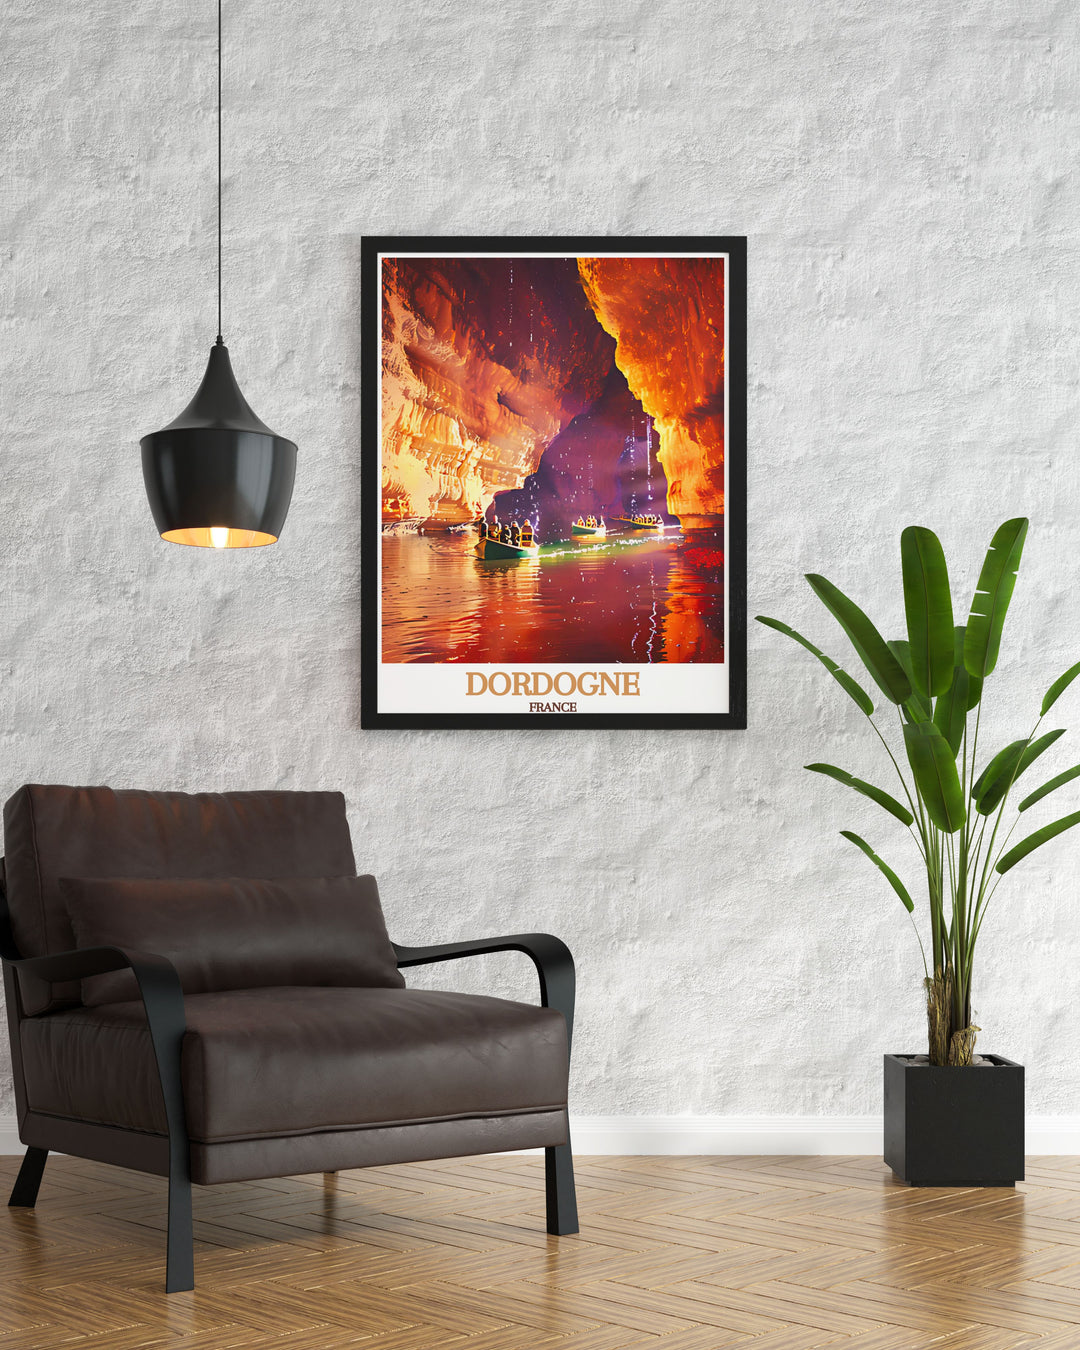 This travel poster captures the enchanting landscapes of Dordogne, showcasing its picturesque villages and lush valleys, perfect for adding a touch of French charm to your home.